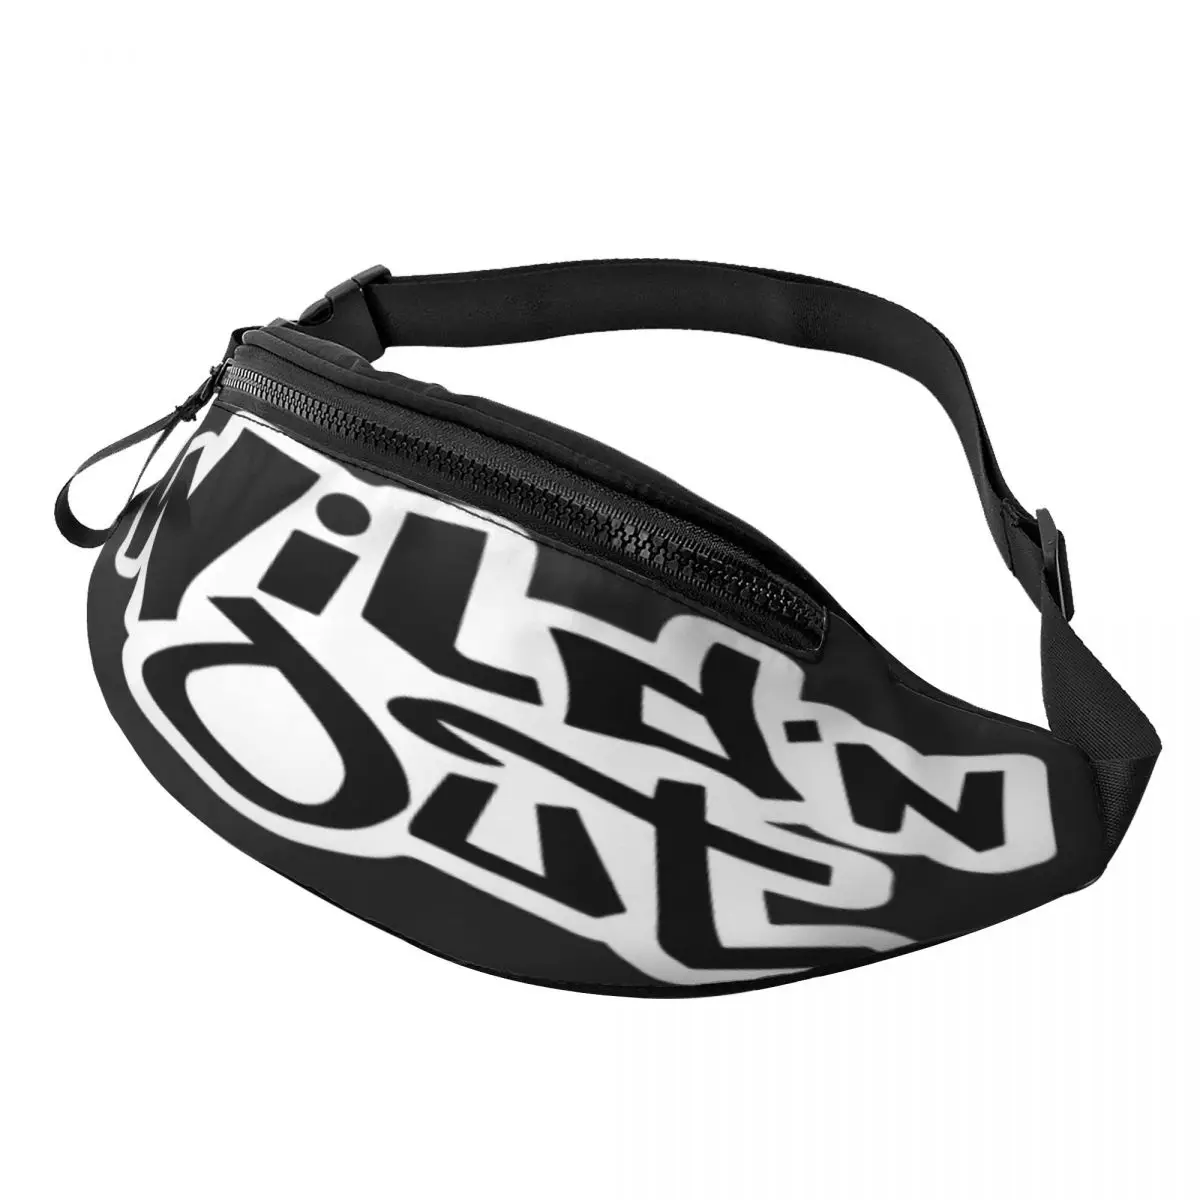 

Wild N Out Fanny Pack,Waist Bag Retro Adjustable waistband Suitable Office Nice gift Customizable